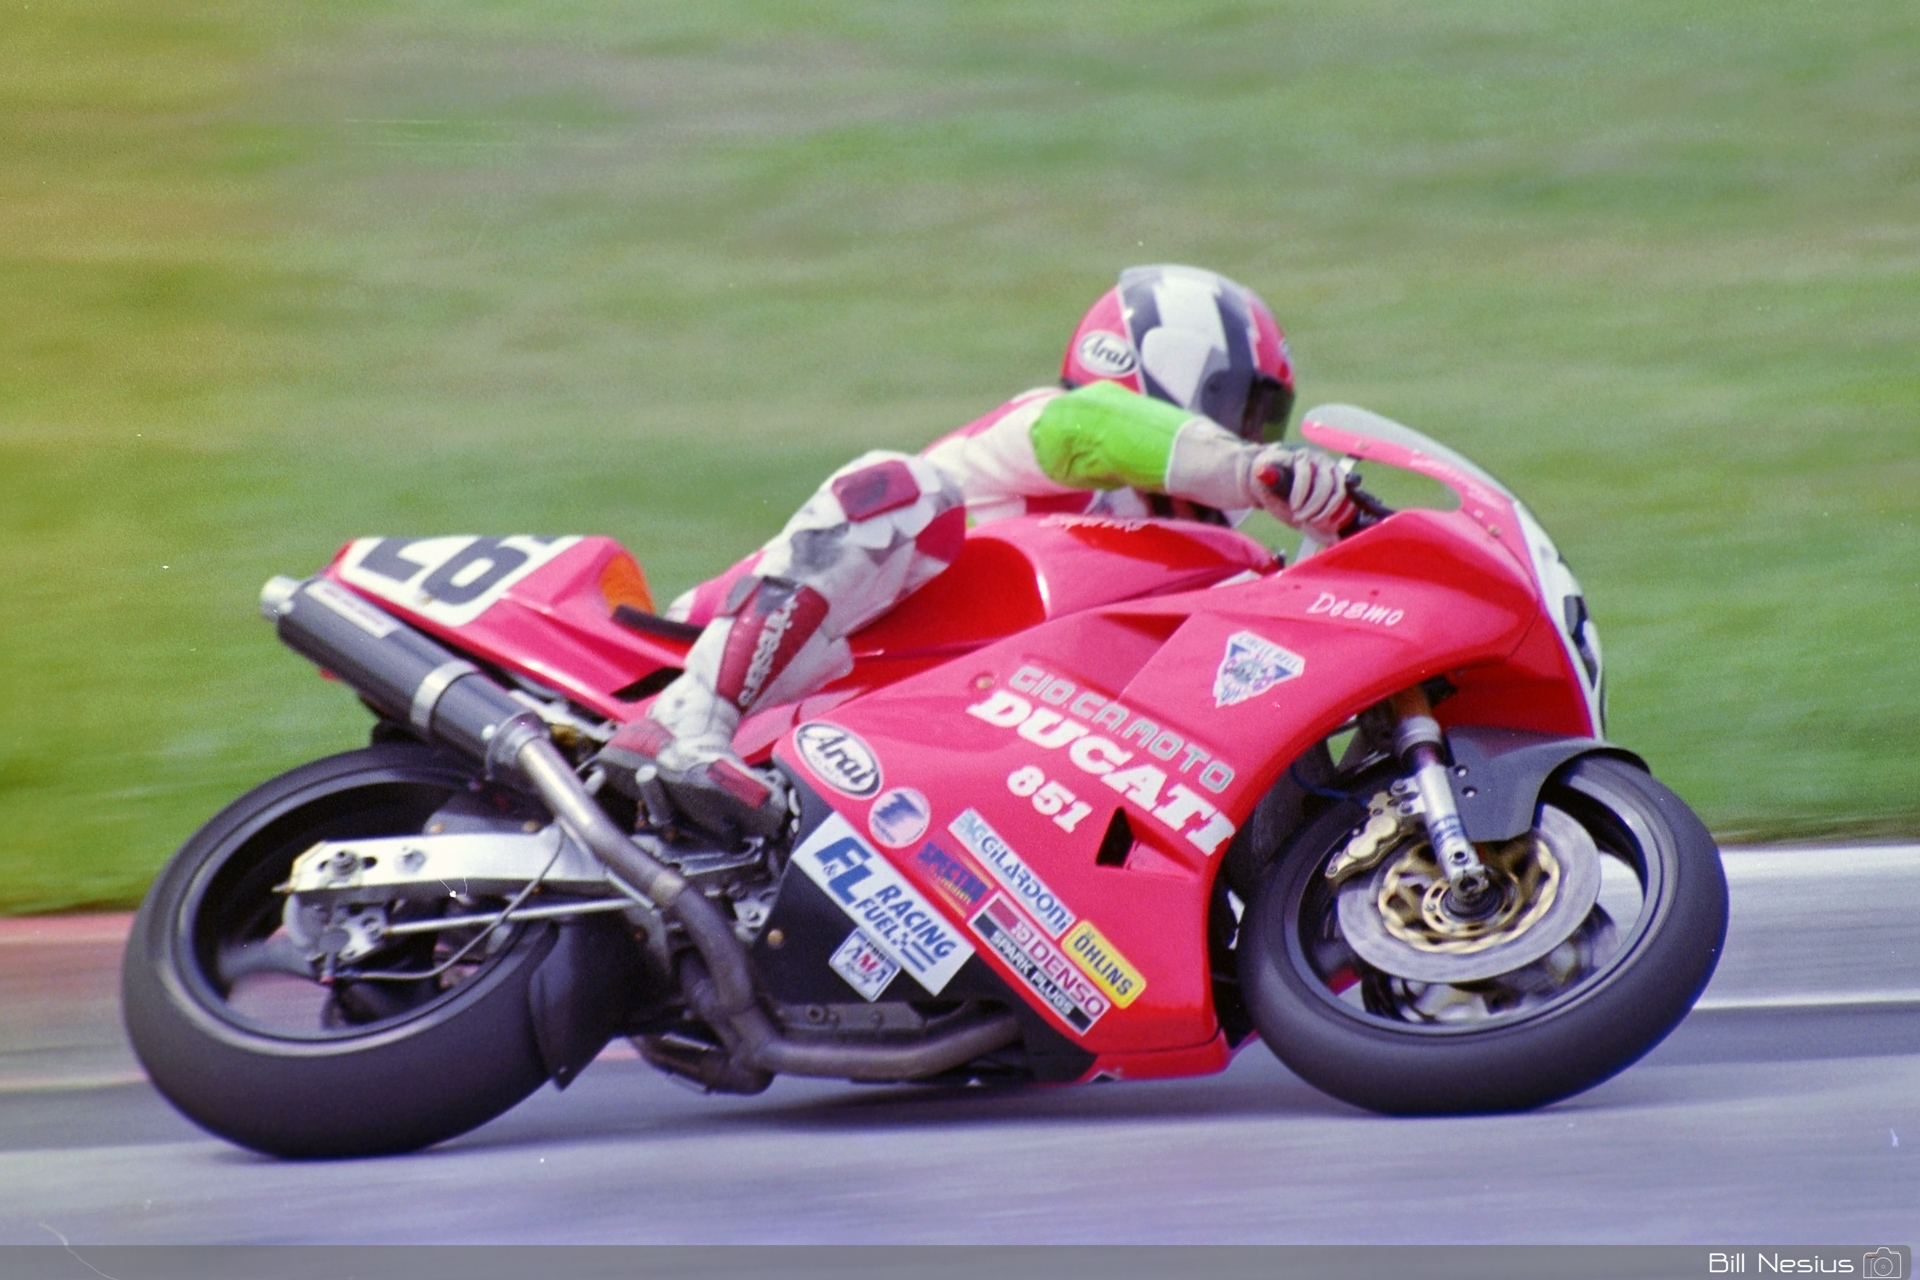 Jimmy Adamo on a the Number 26 Ducati 851 / FLM_5869 / 2